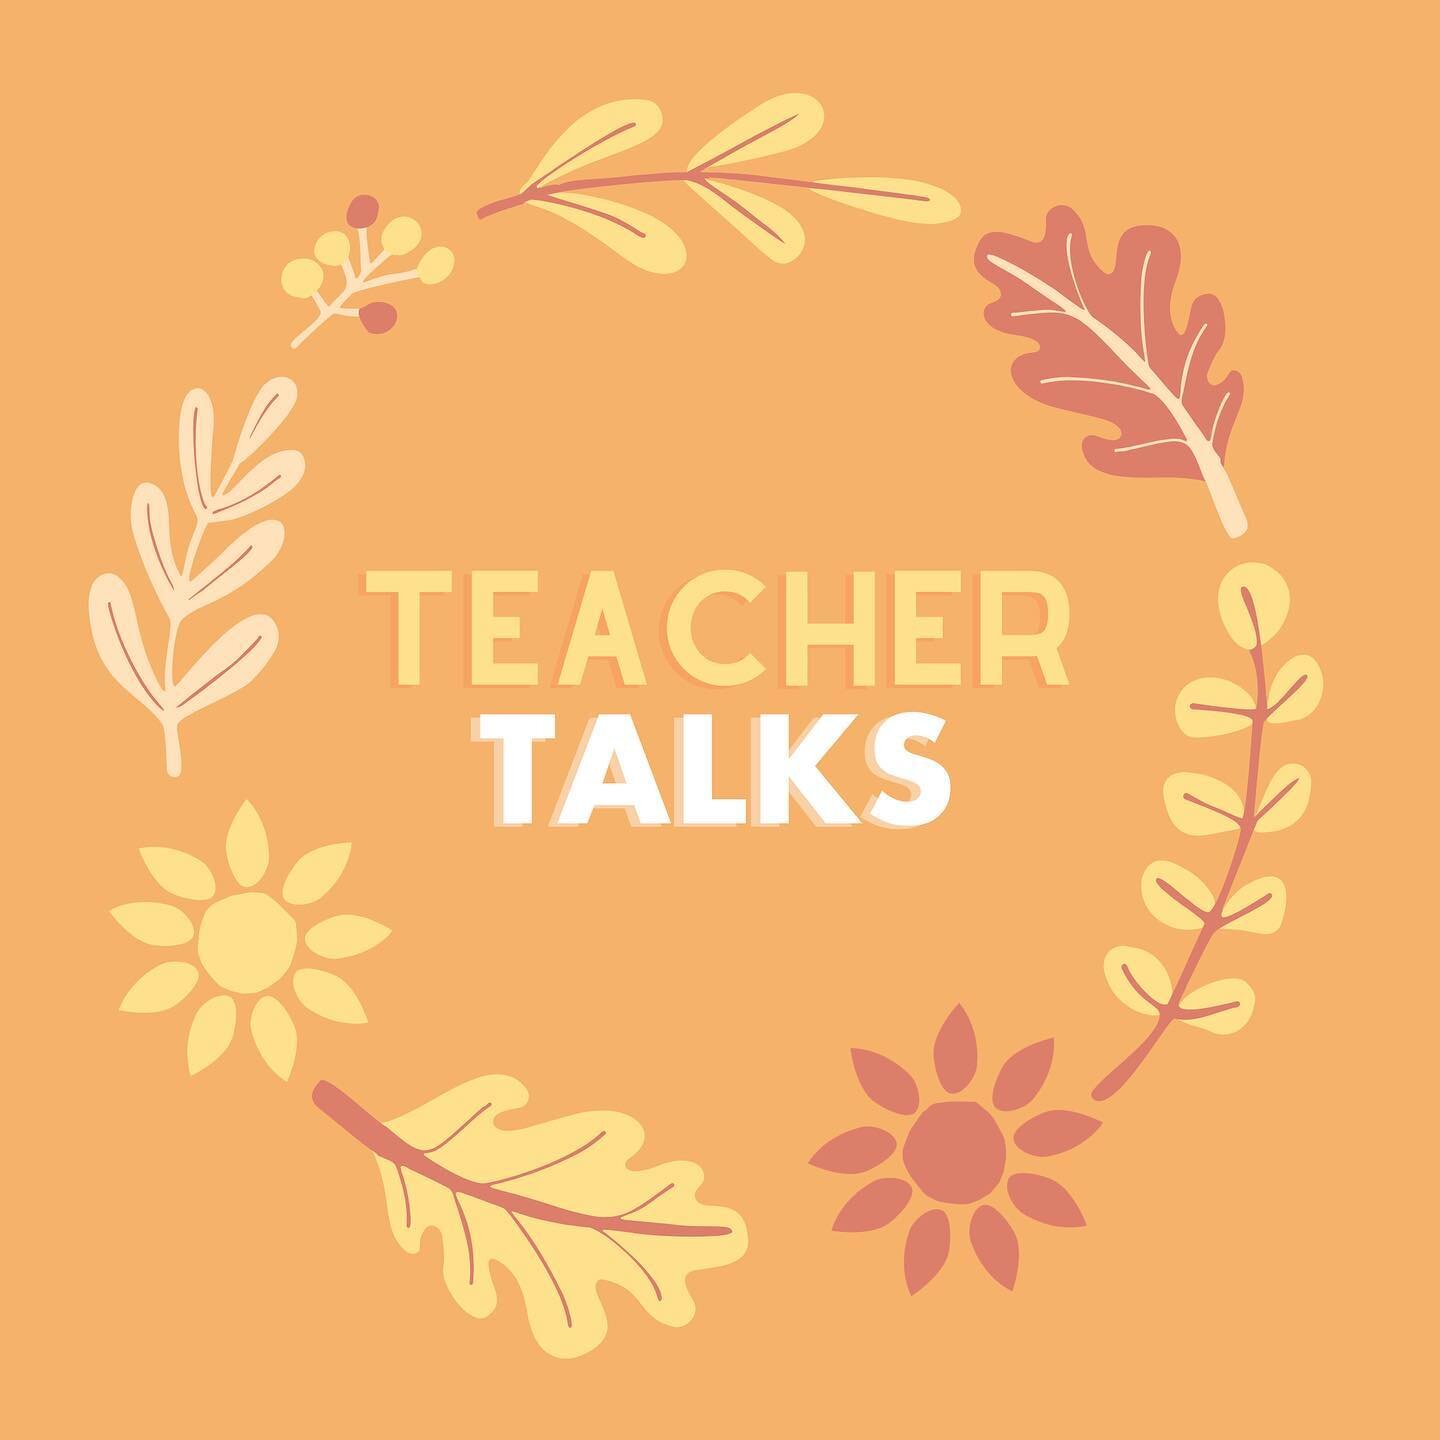 Our favorite season is coming, and to celebrate, we&rsquo;ve launched a #TeacherTalk series!

Check out our blog and first interview with Allyssa, of @teachingintheflx. 

We are excited to diversify our program and support teachers. That&rsquo;s why 